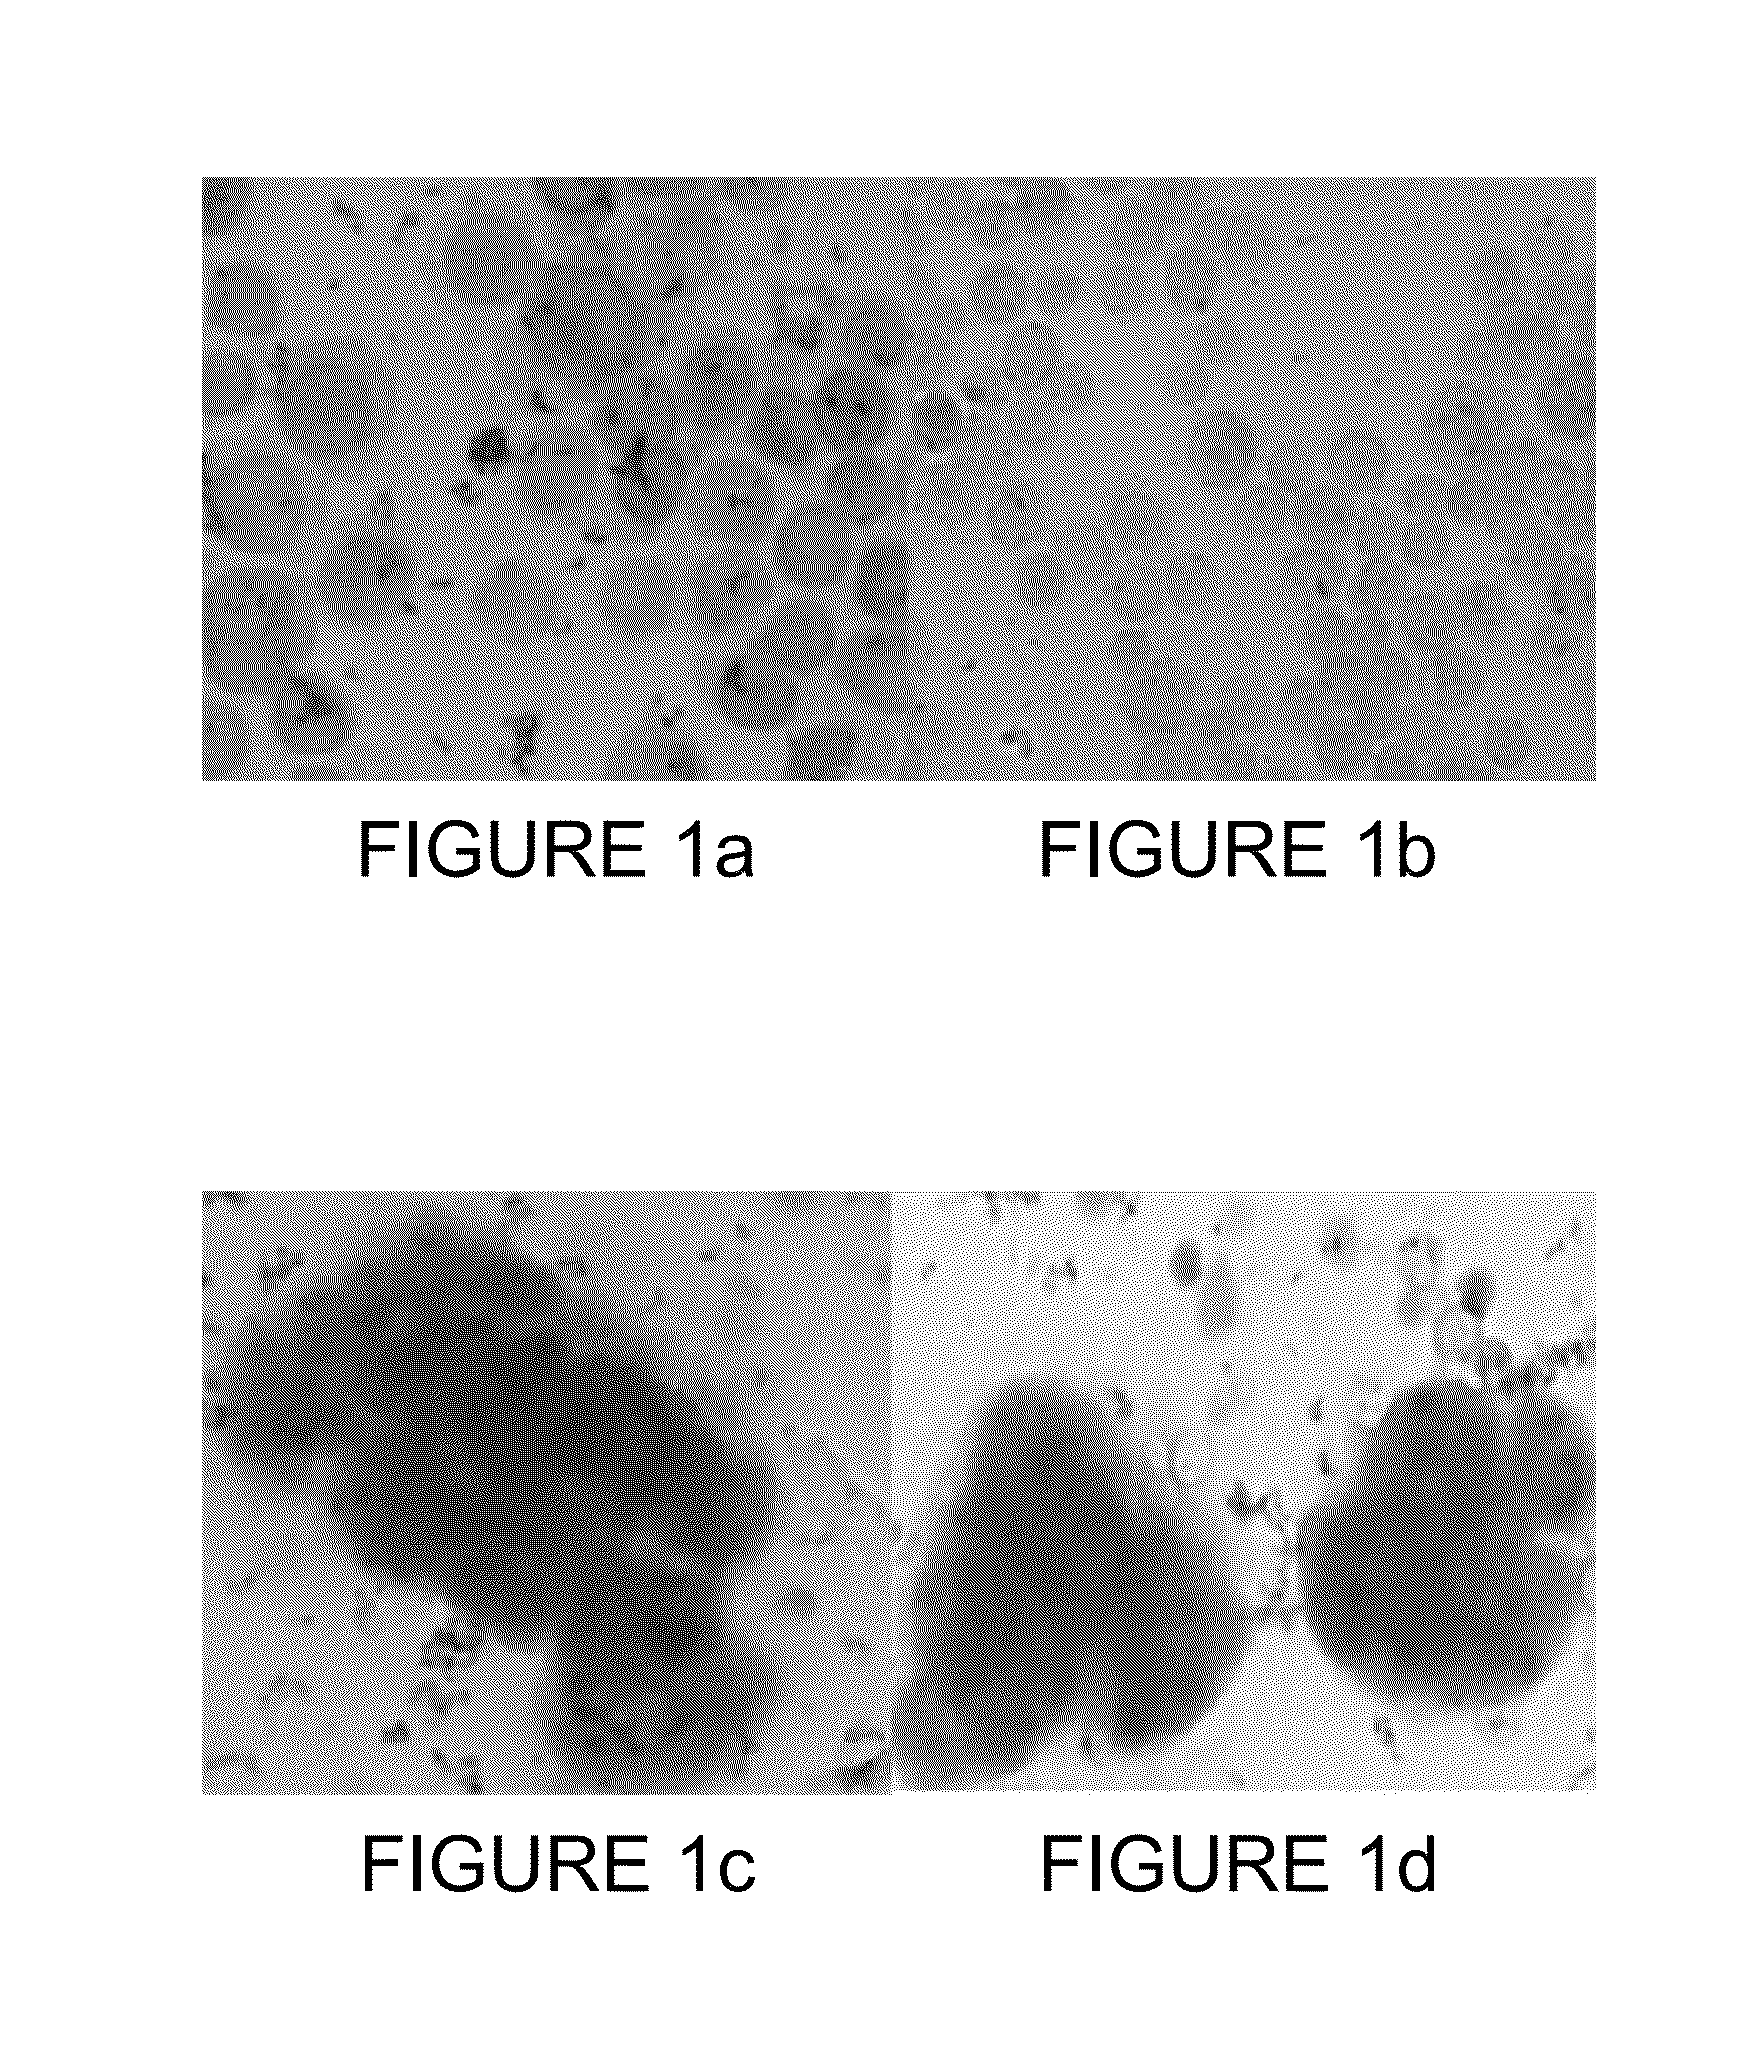 Method of obtaining circulating cancer cell populations